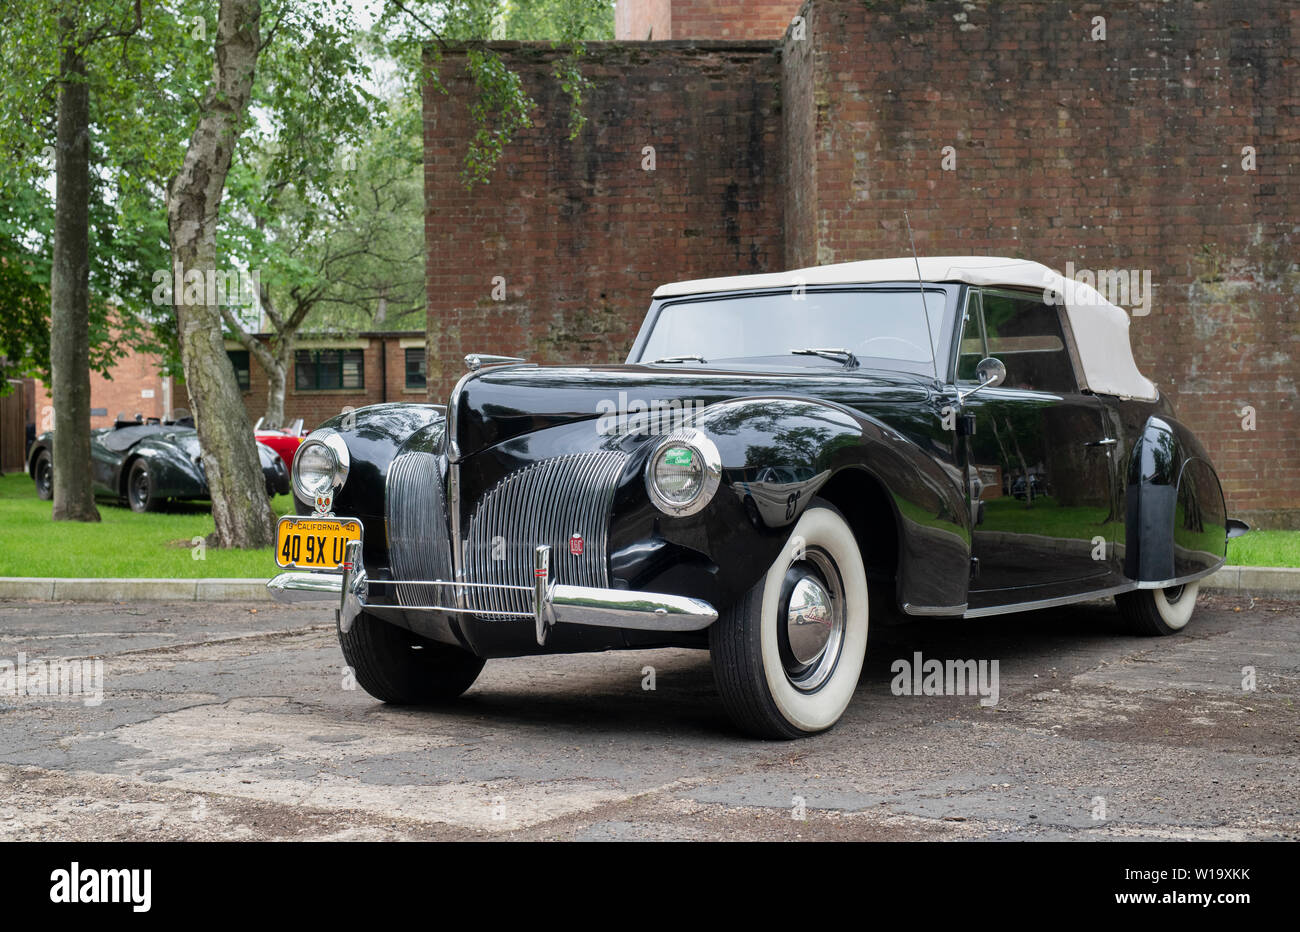 Jahrgang 1940 Lincoln Continental Cabriolet Auto Zephyr im Bicester Heritage Center super Jagtfall. Bicester, Oxfordshire, England Stockfoto